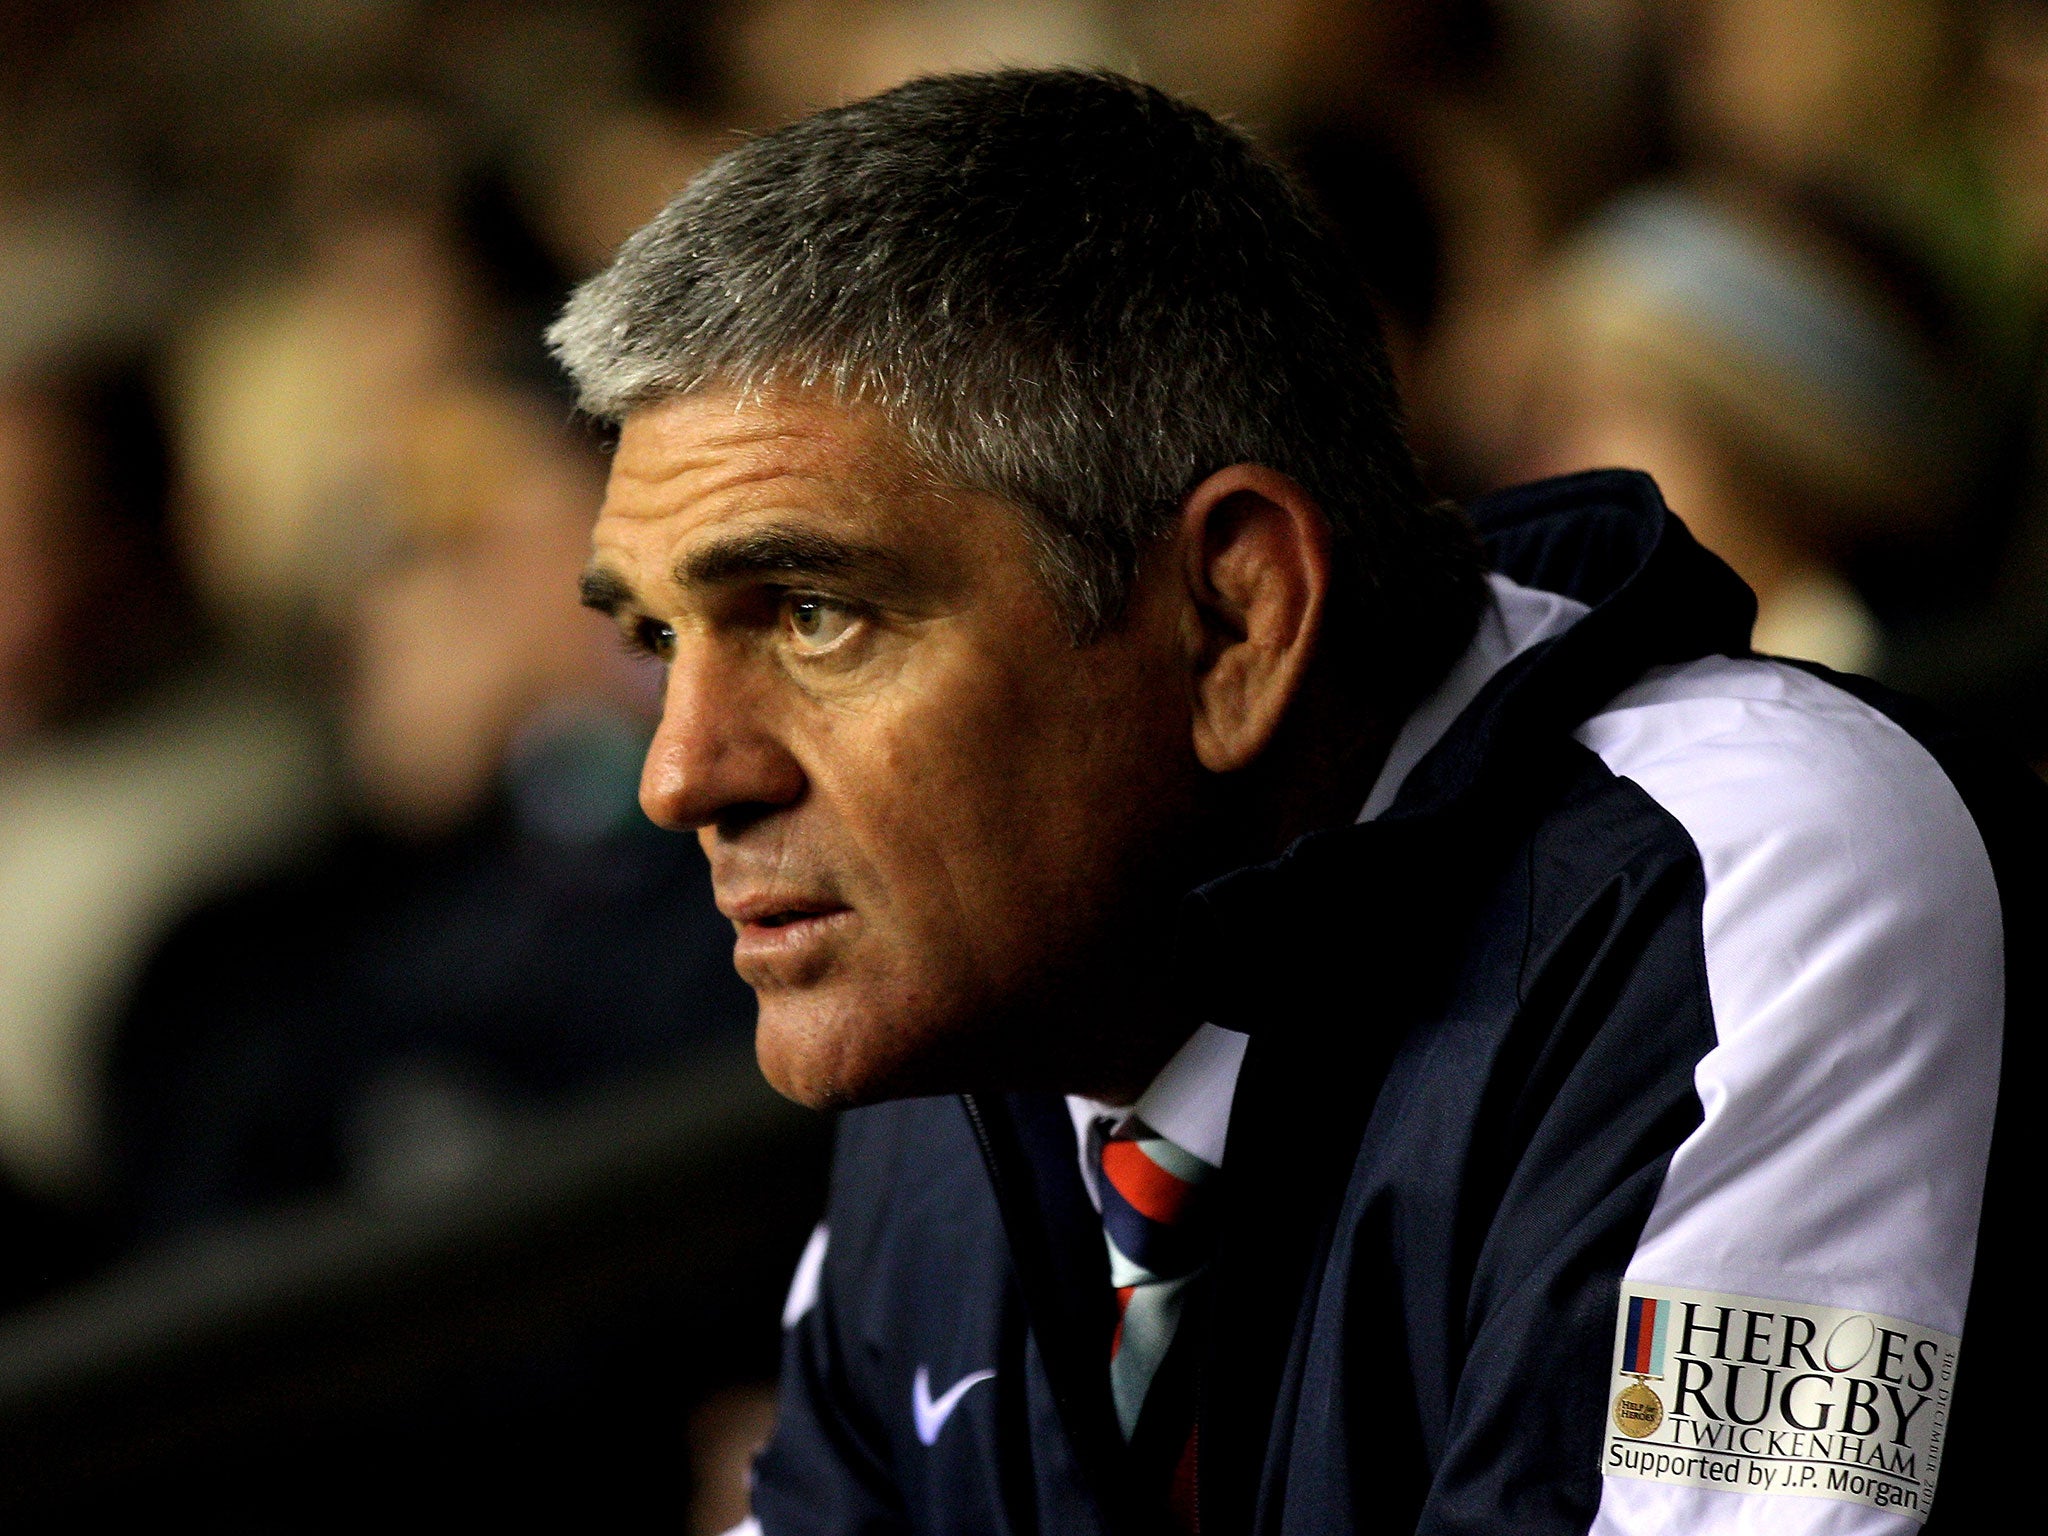 Nick Mallett claims to have been contacted by the RFU